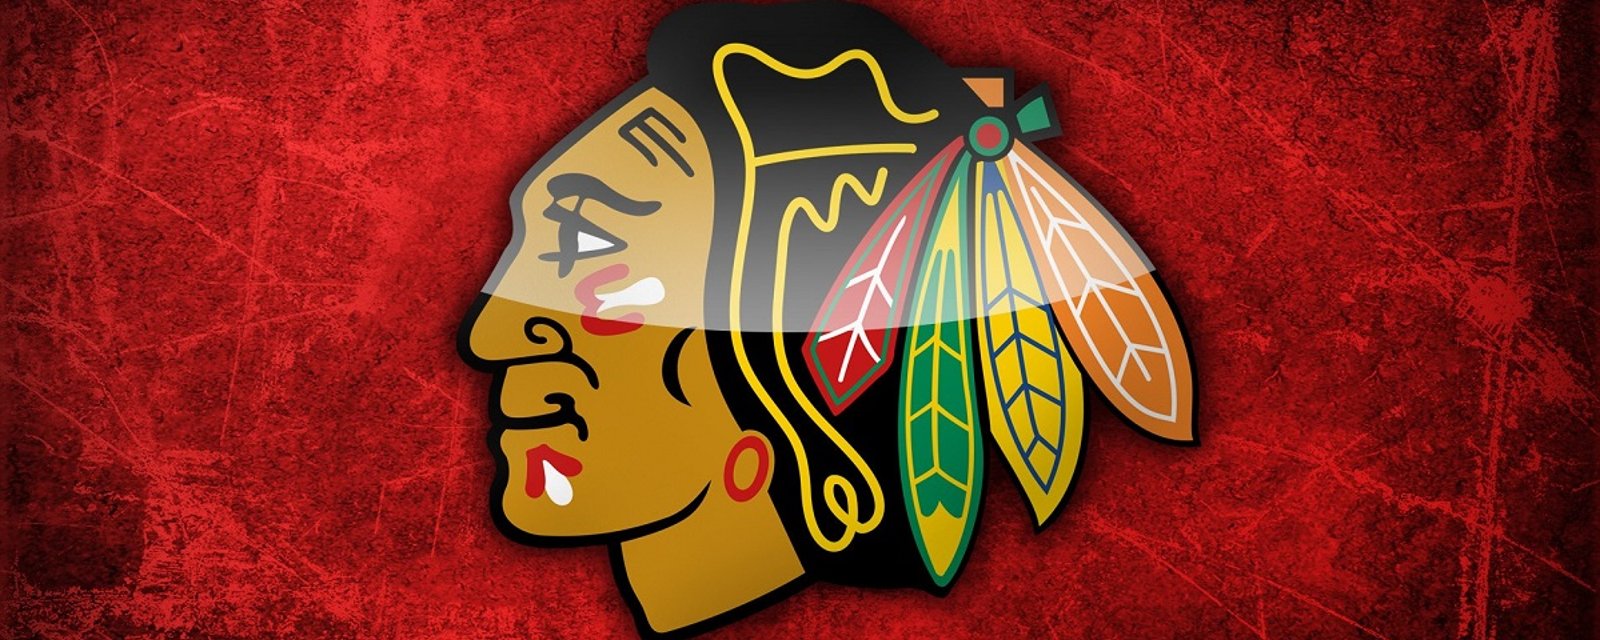 Former Blackhawks coach speaks out amid sexual abuse allegations in Chicago.